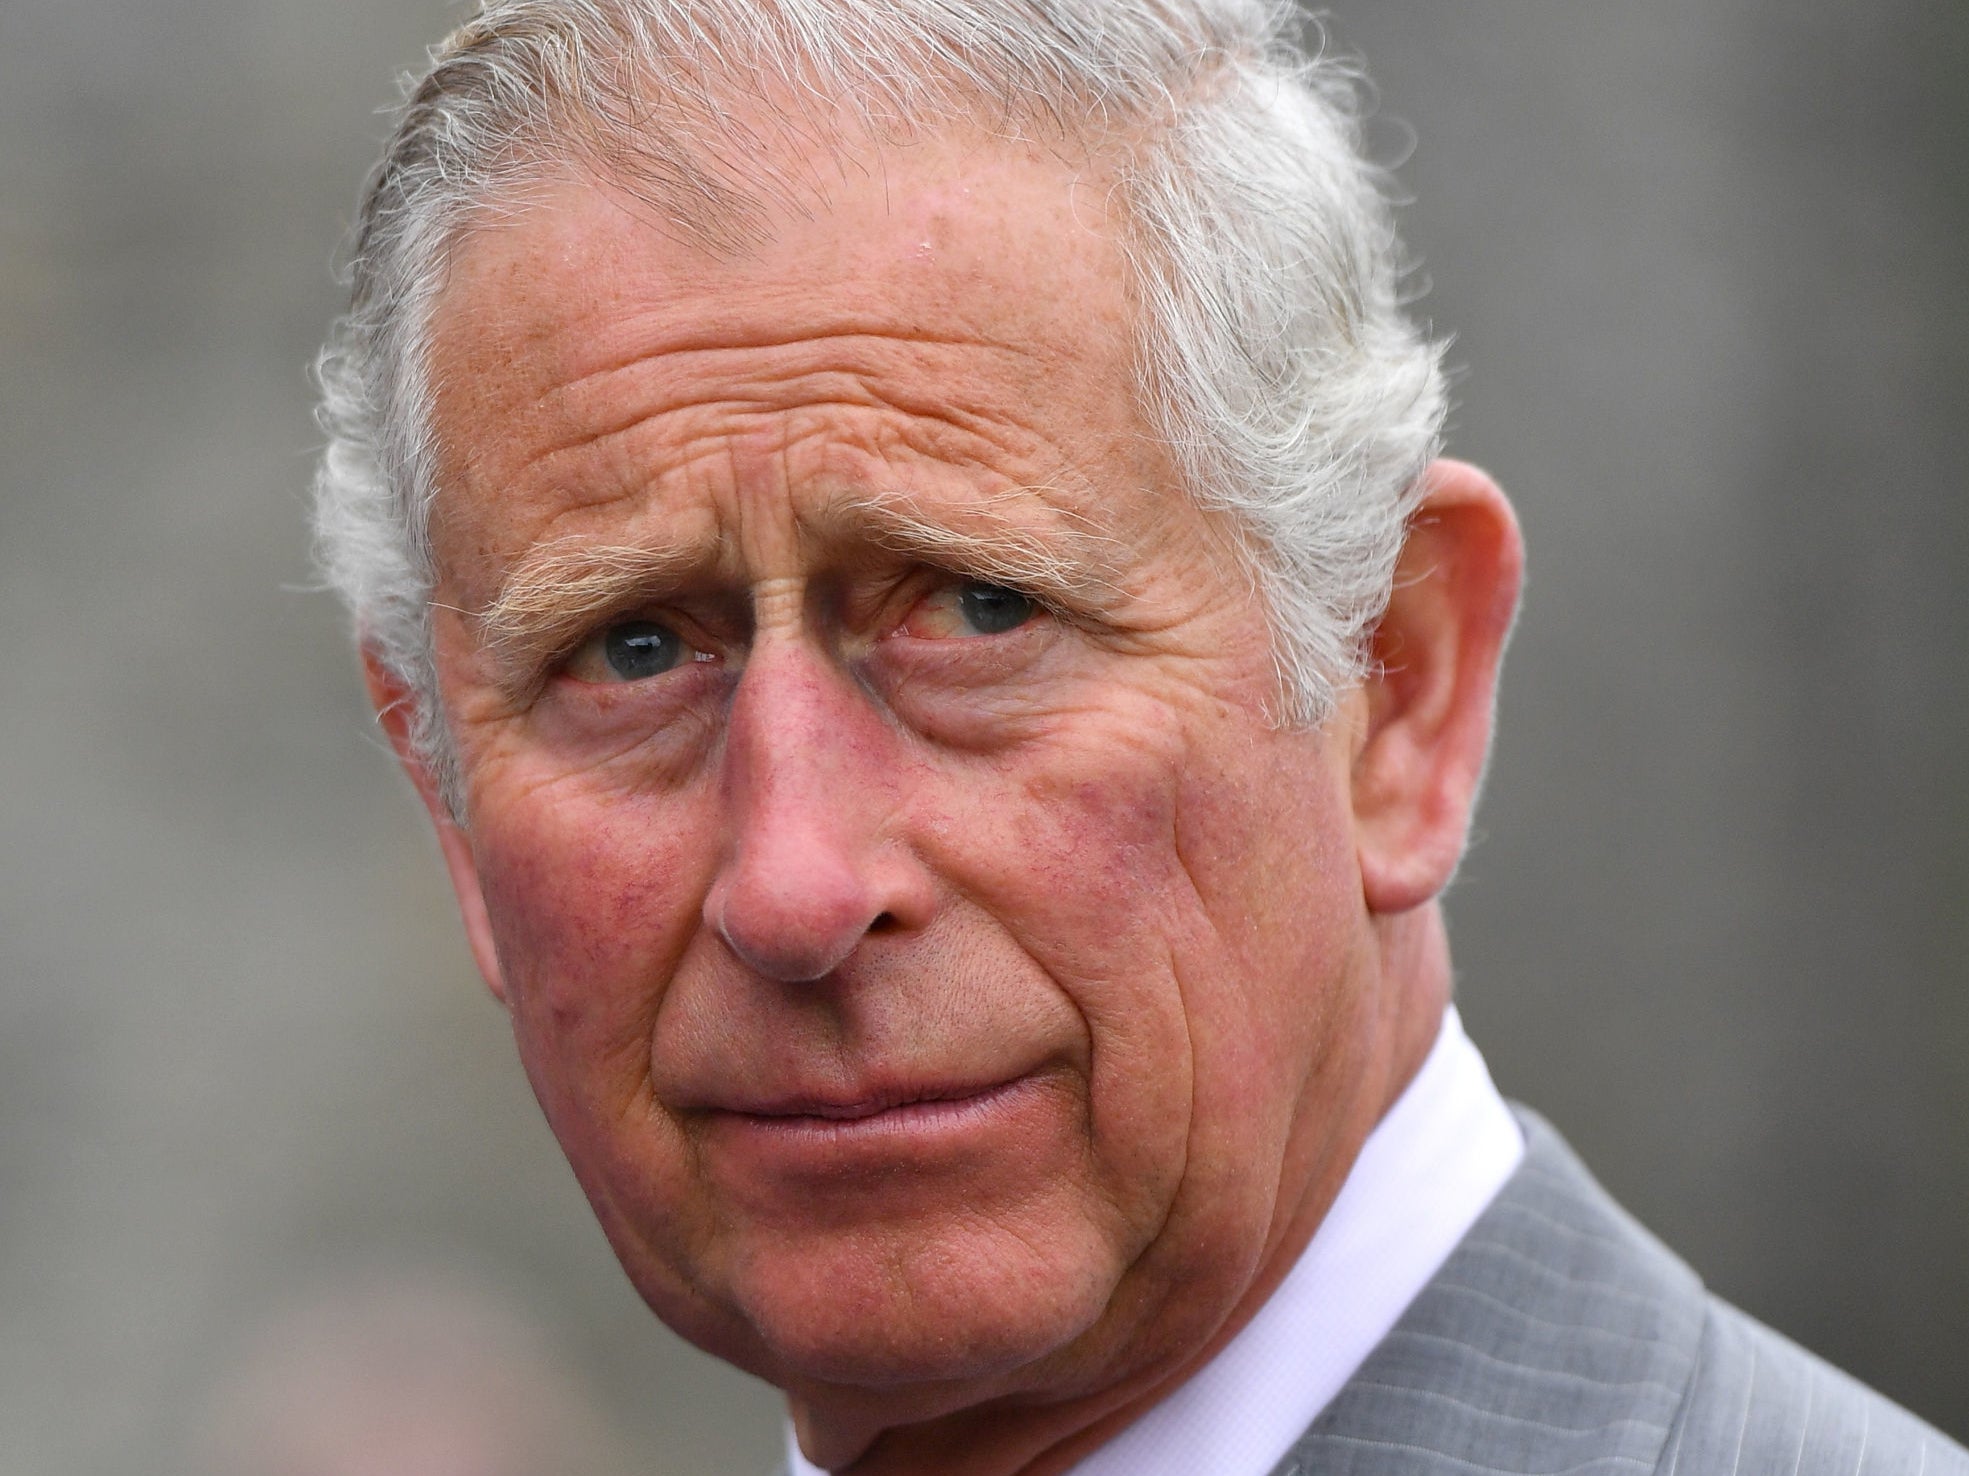 Charles faced criticism after being presented with cash reportedly totalling three million euros